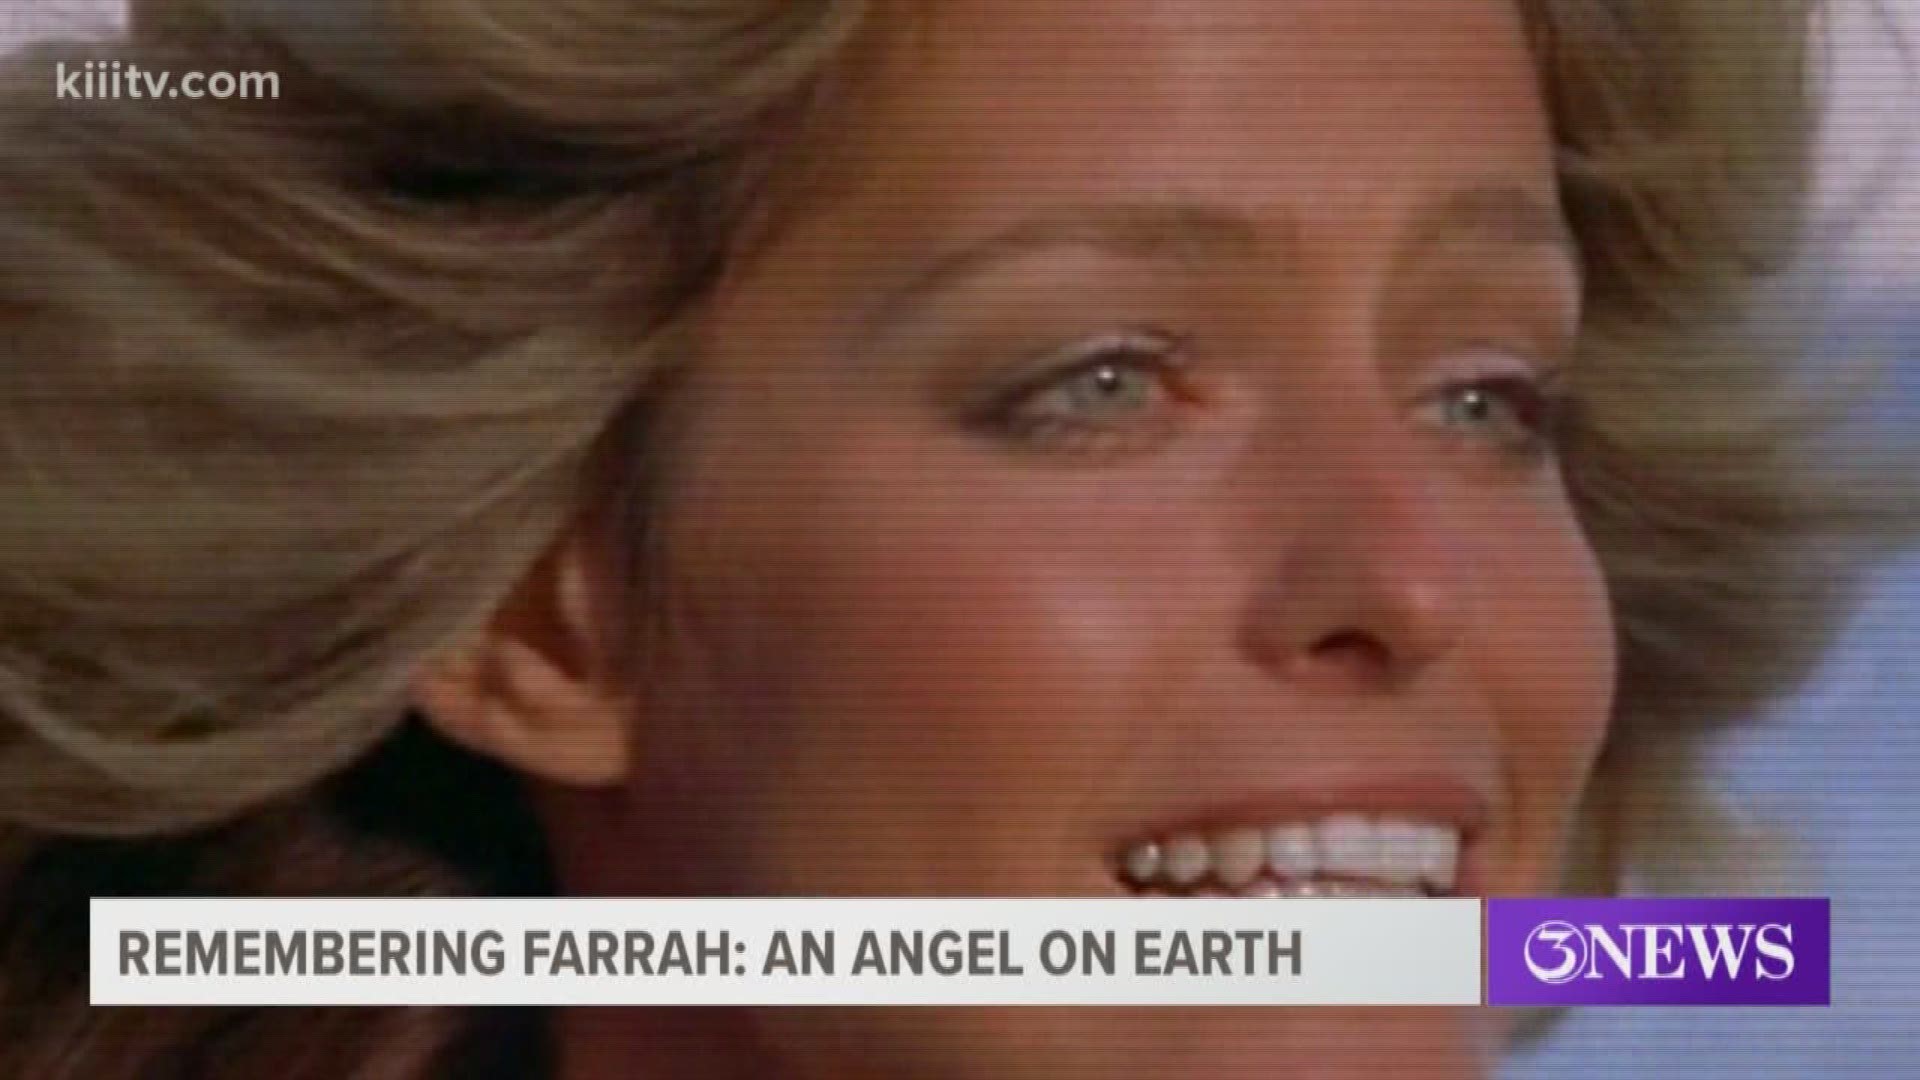 She was known around the world for her work on the TV show "Charlie's Angels", and next month will mark the 10-year anniversary of Farrah Fawcett's death.